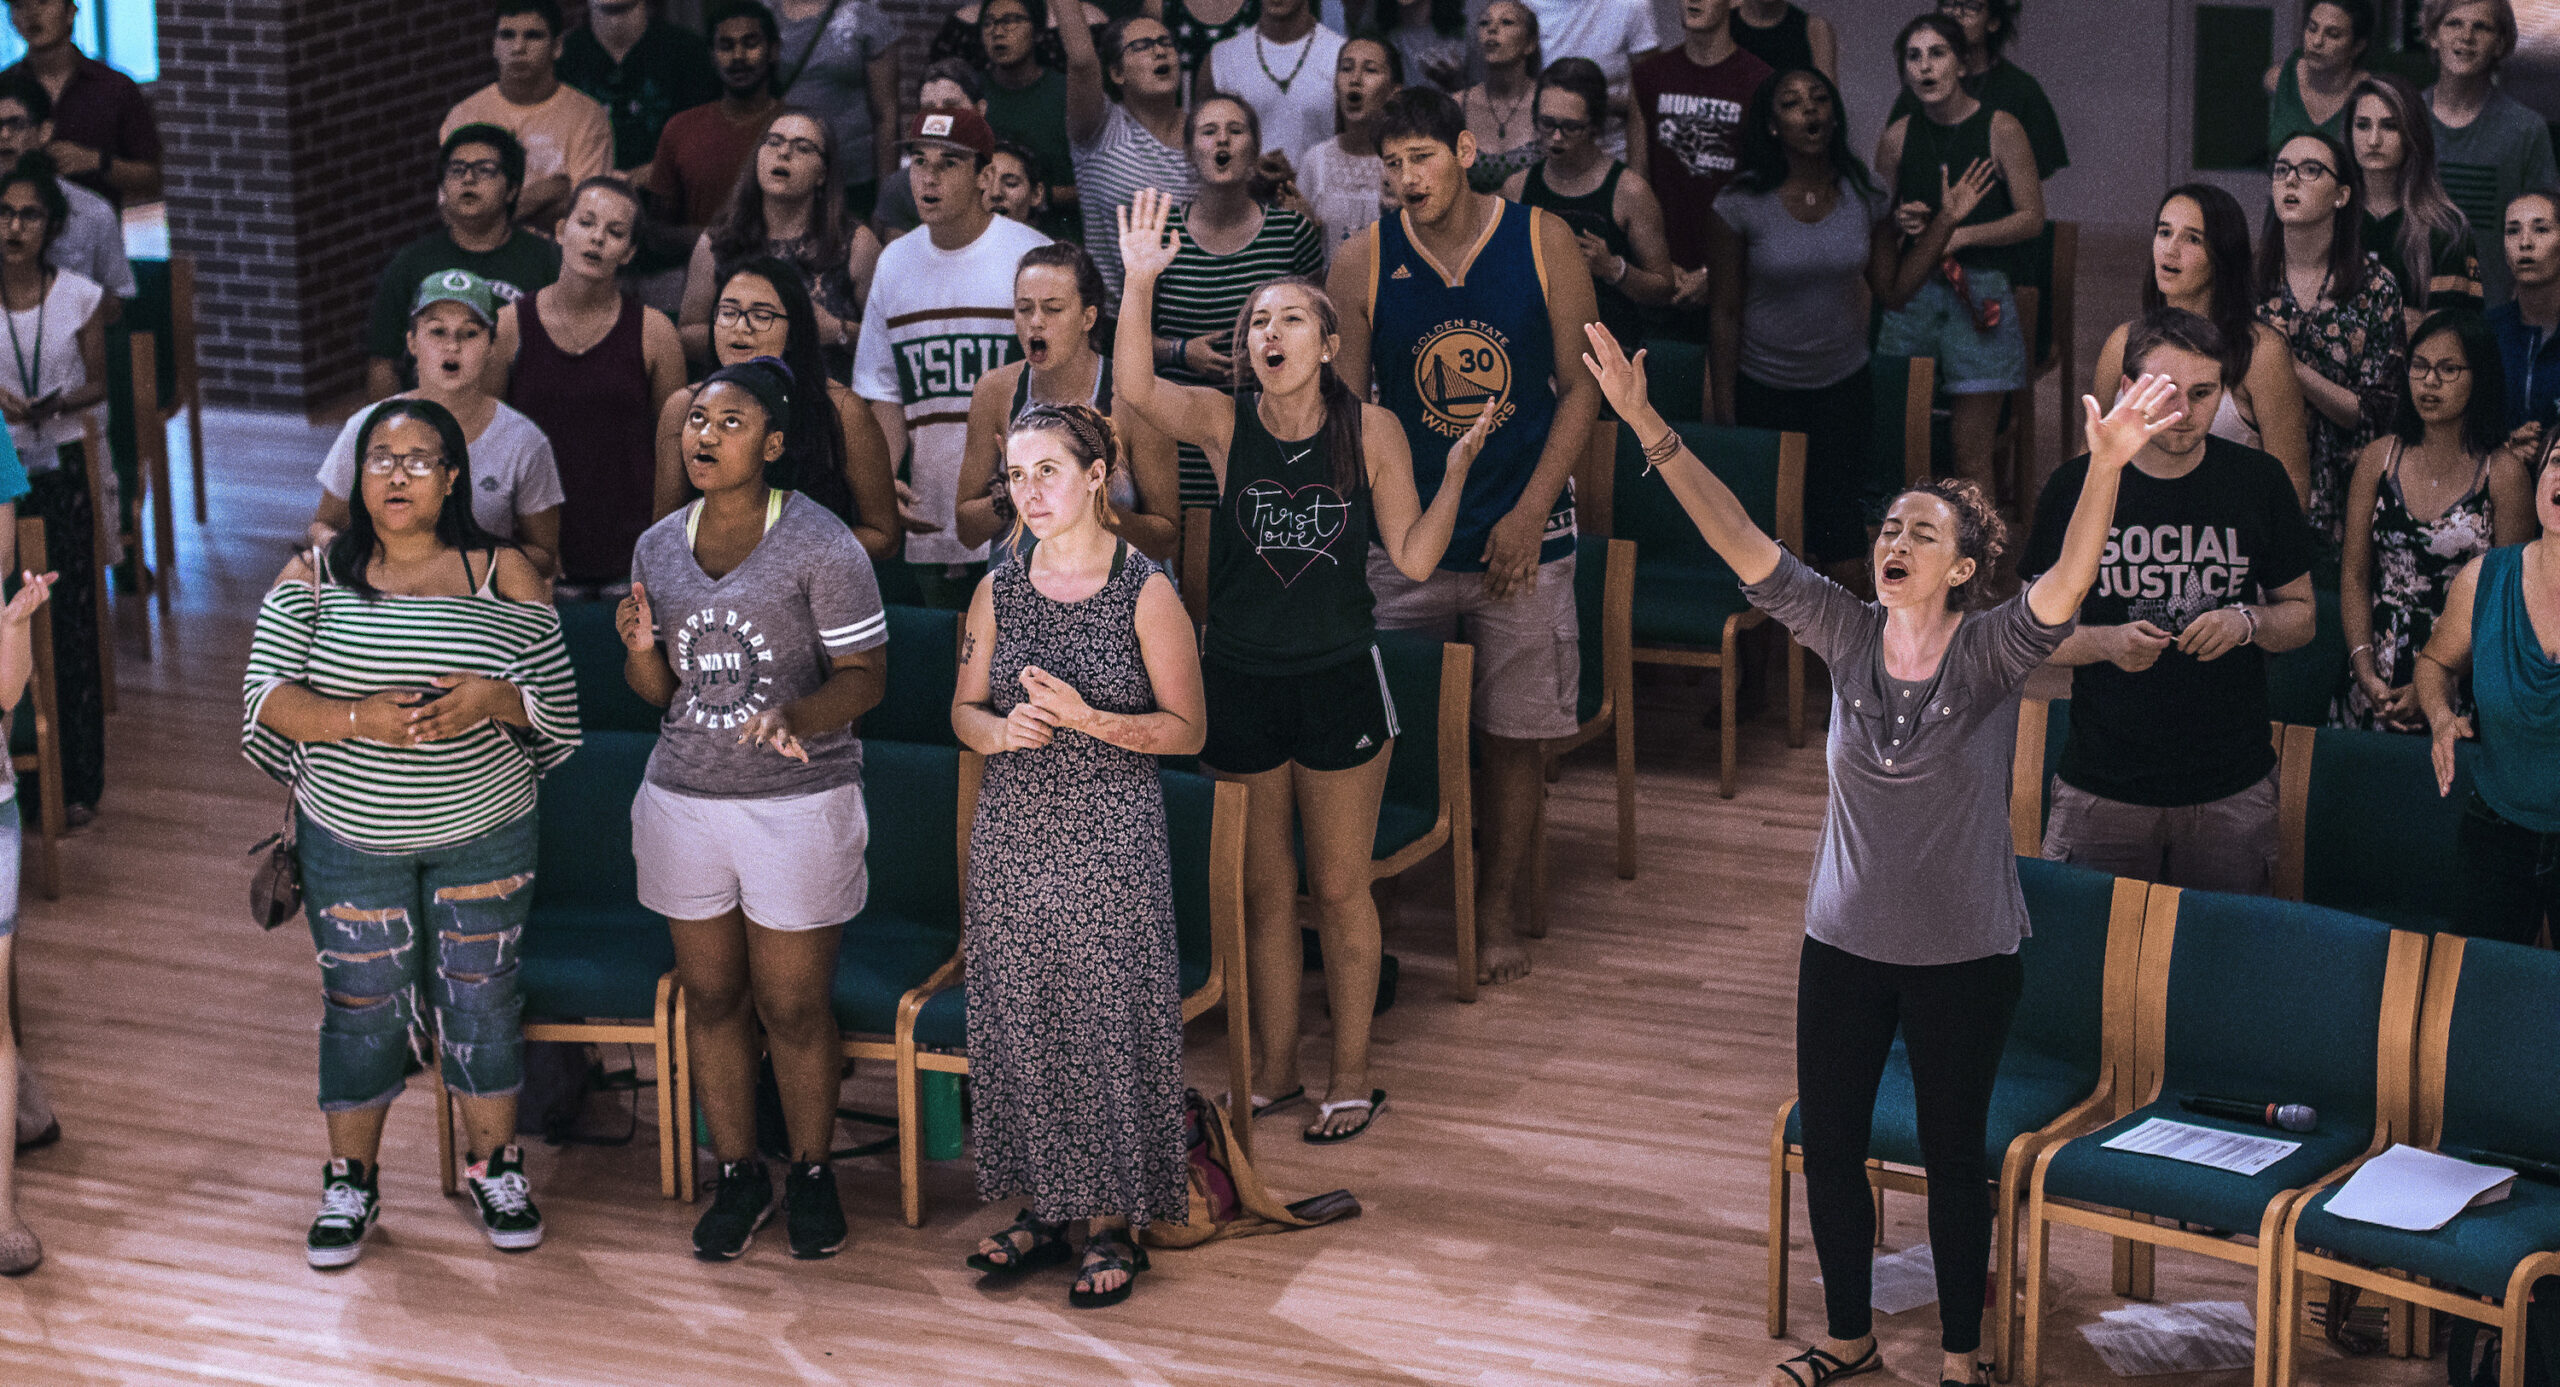 Students gathered in chapel sing and raise hands in worship.